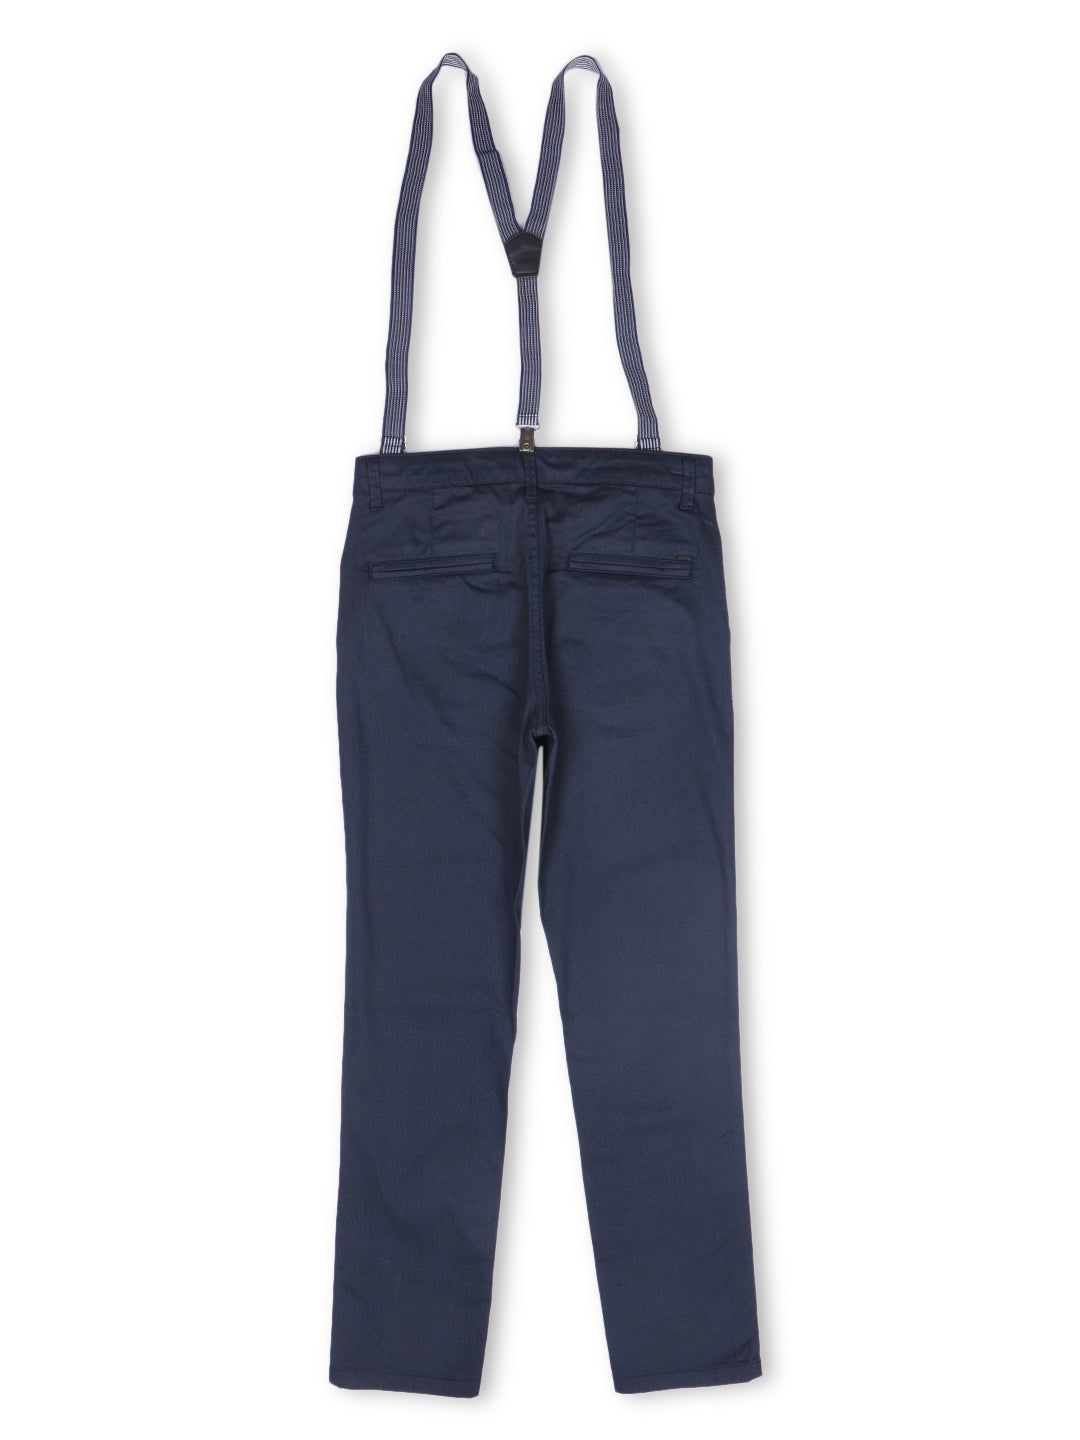 Boys Navy Blue Cotton Solid Trouser